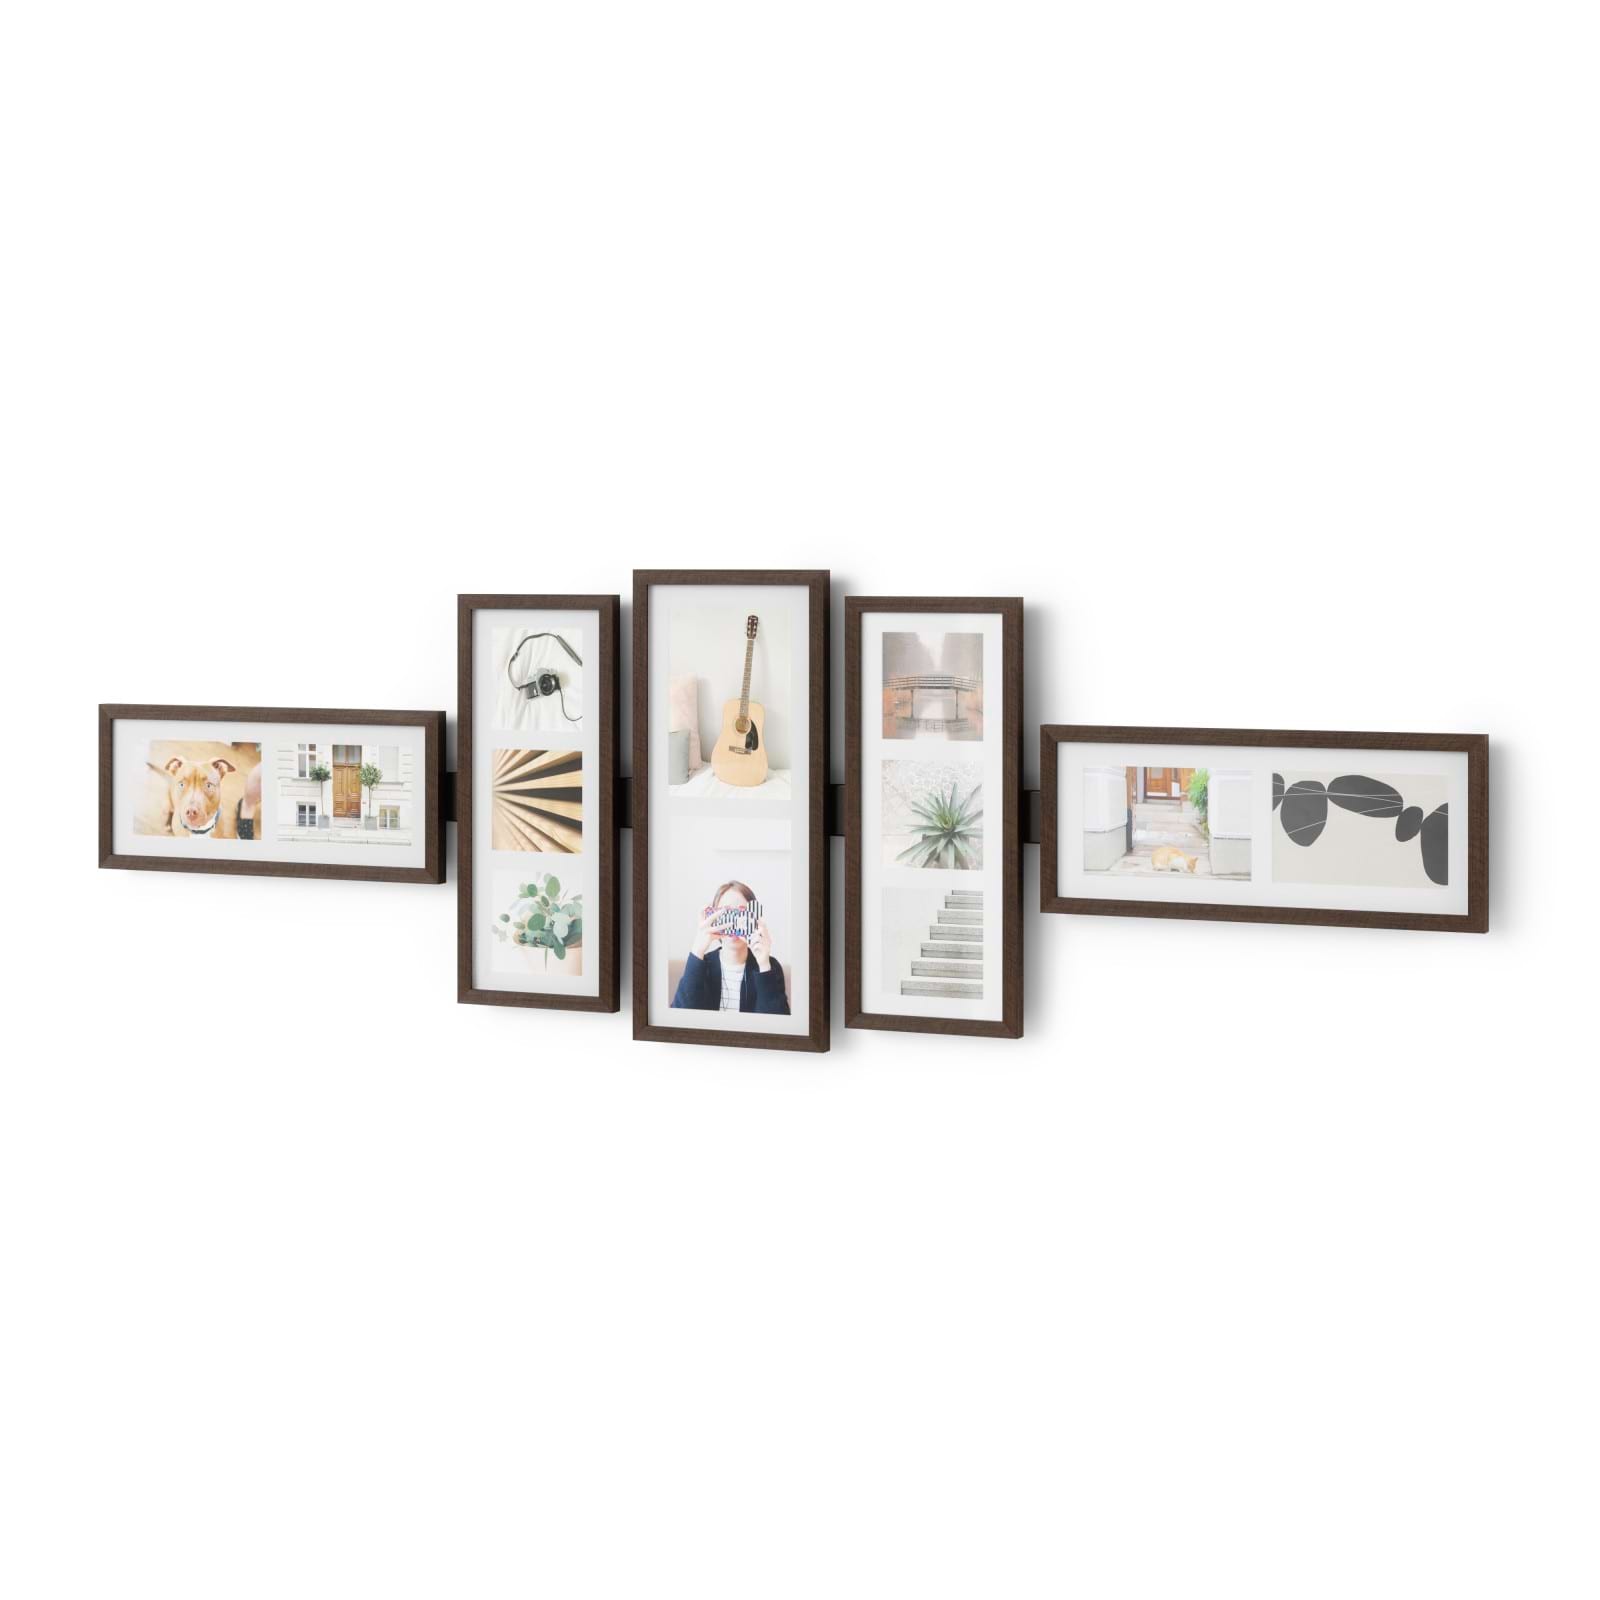 Umbra Shuffle Picture Frame Set Of 5 Aged Walnut Design Is This